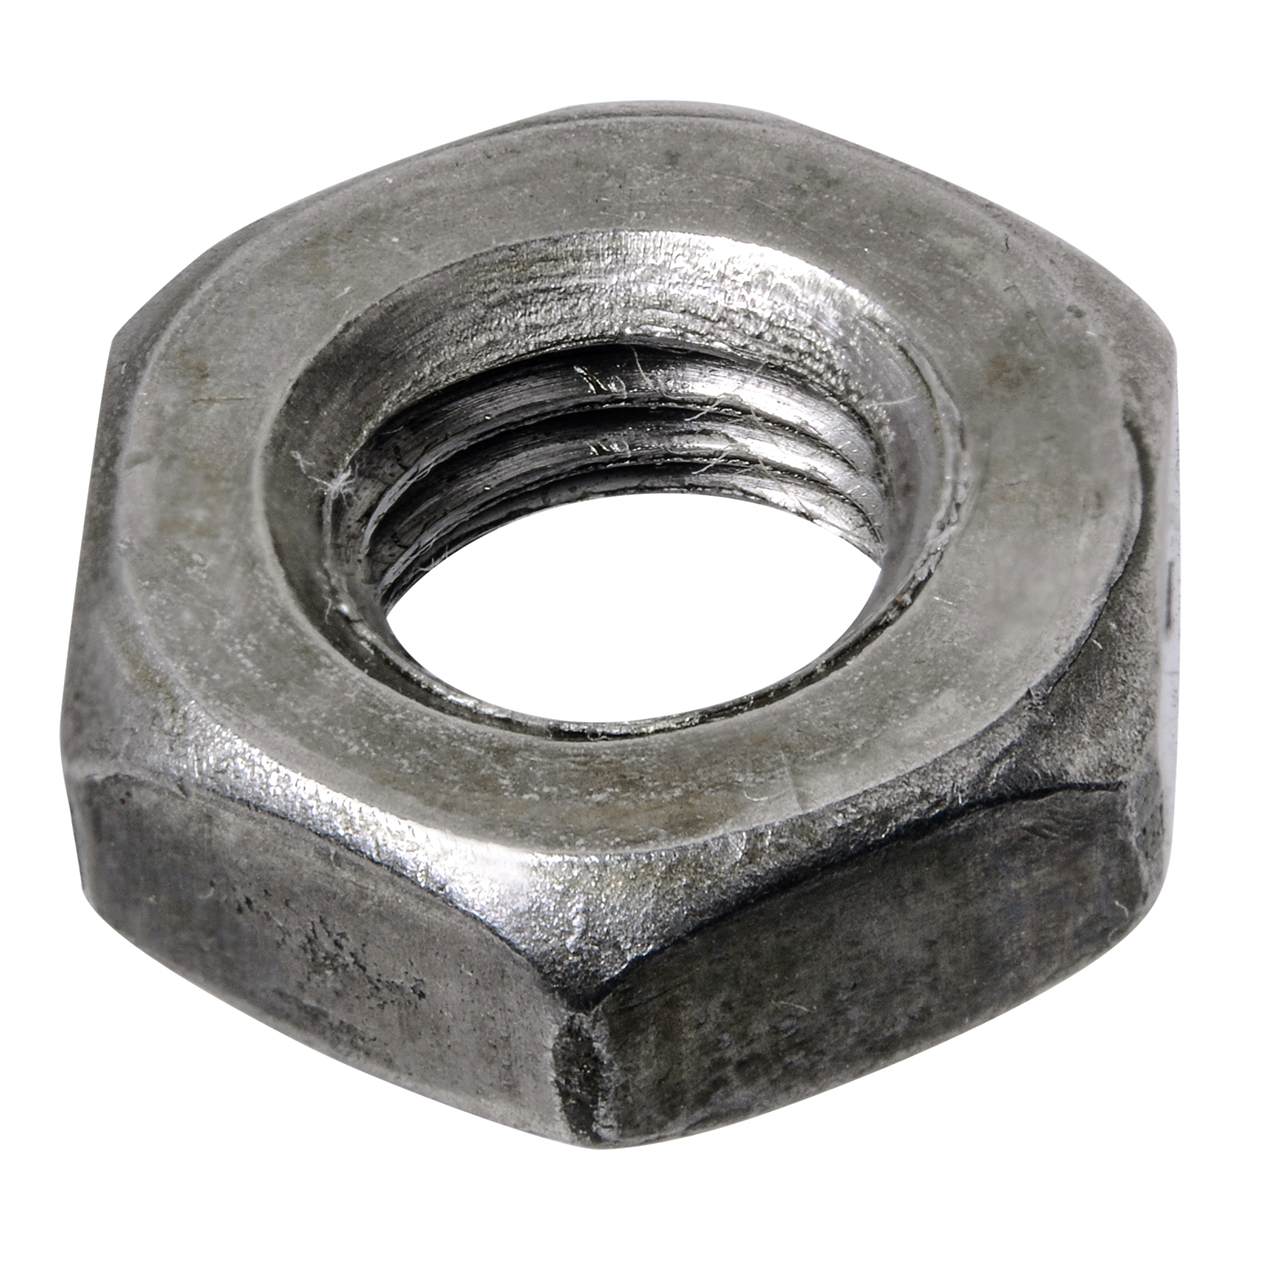 USA Alloy Steel Yellow Cad Plated/Wax 7/8-14 Fine Thread Grade 9 Finished Hex Nut L9 